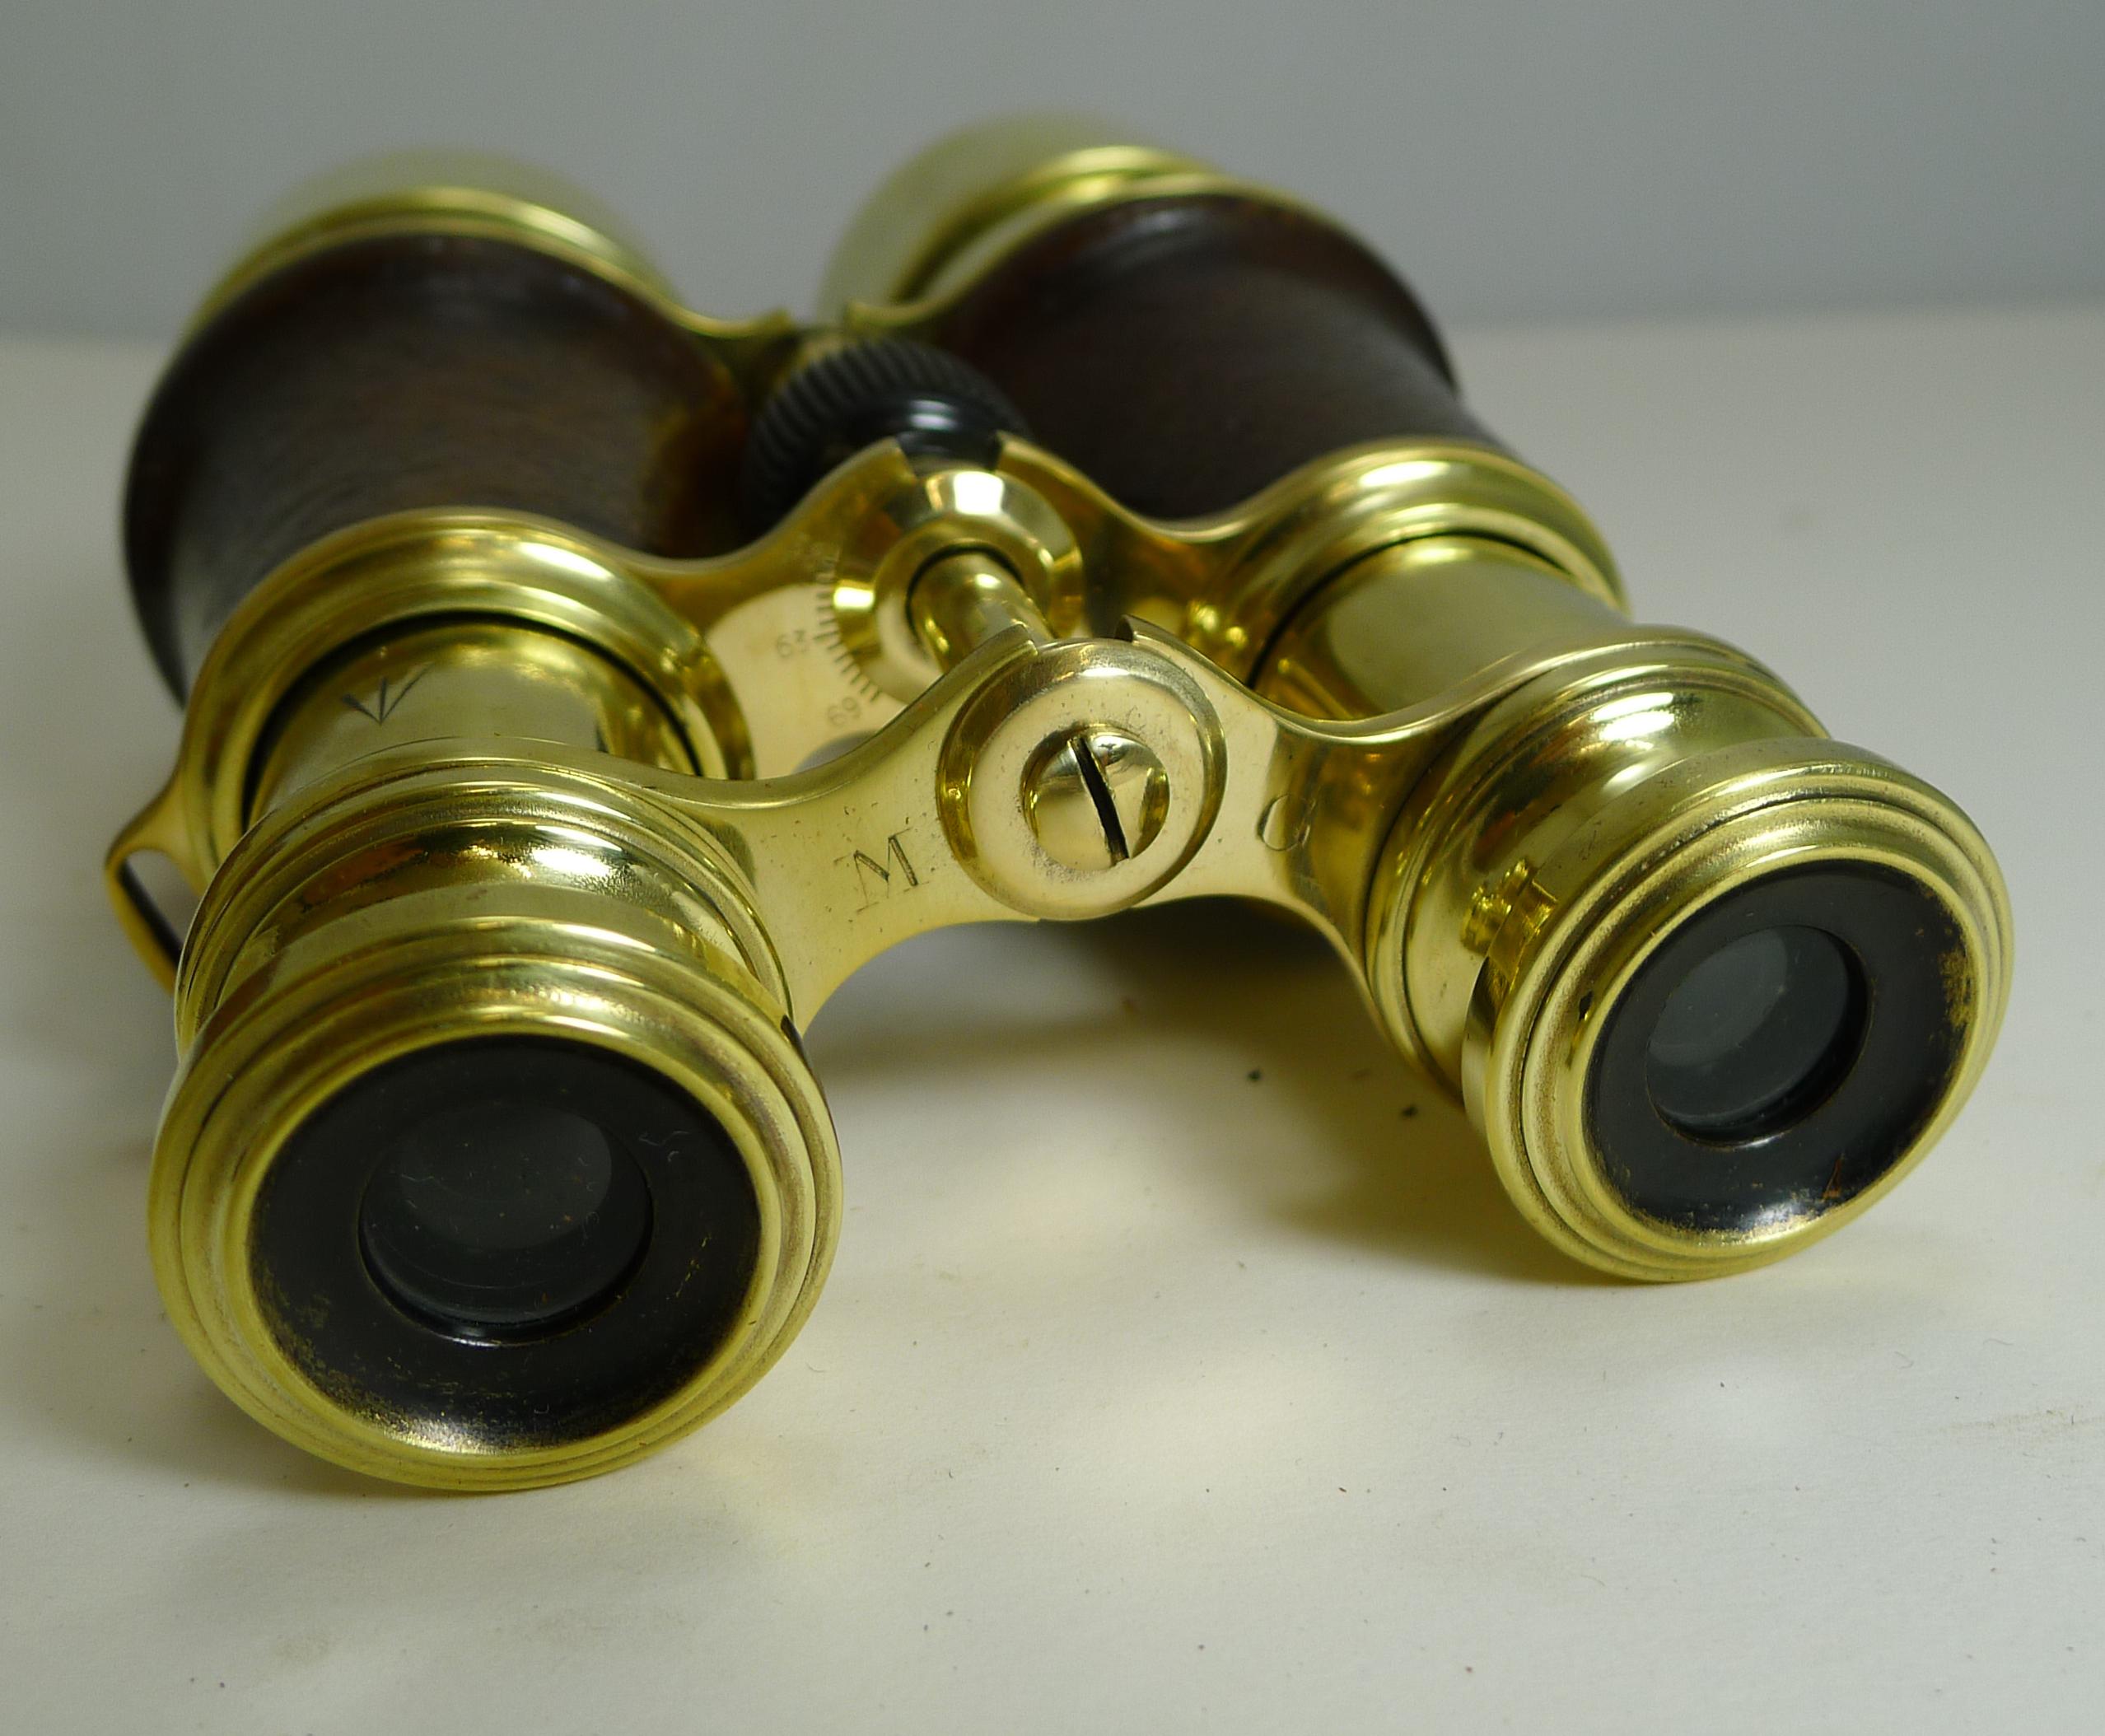 English Superb Pair of WWI Binoculars and Case, British Officer's Issue, 1918